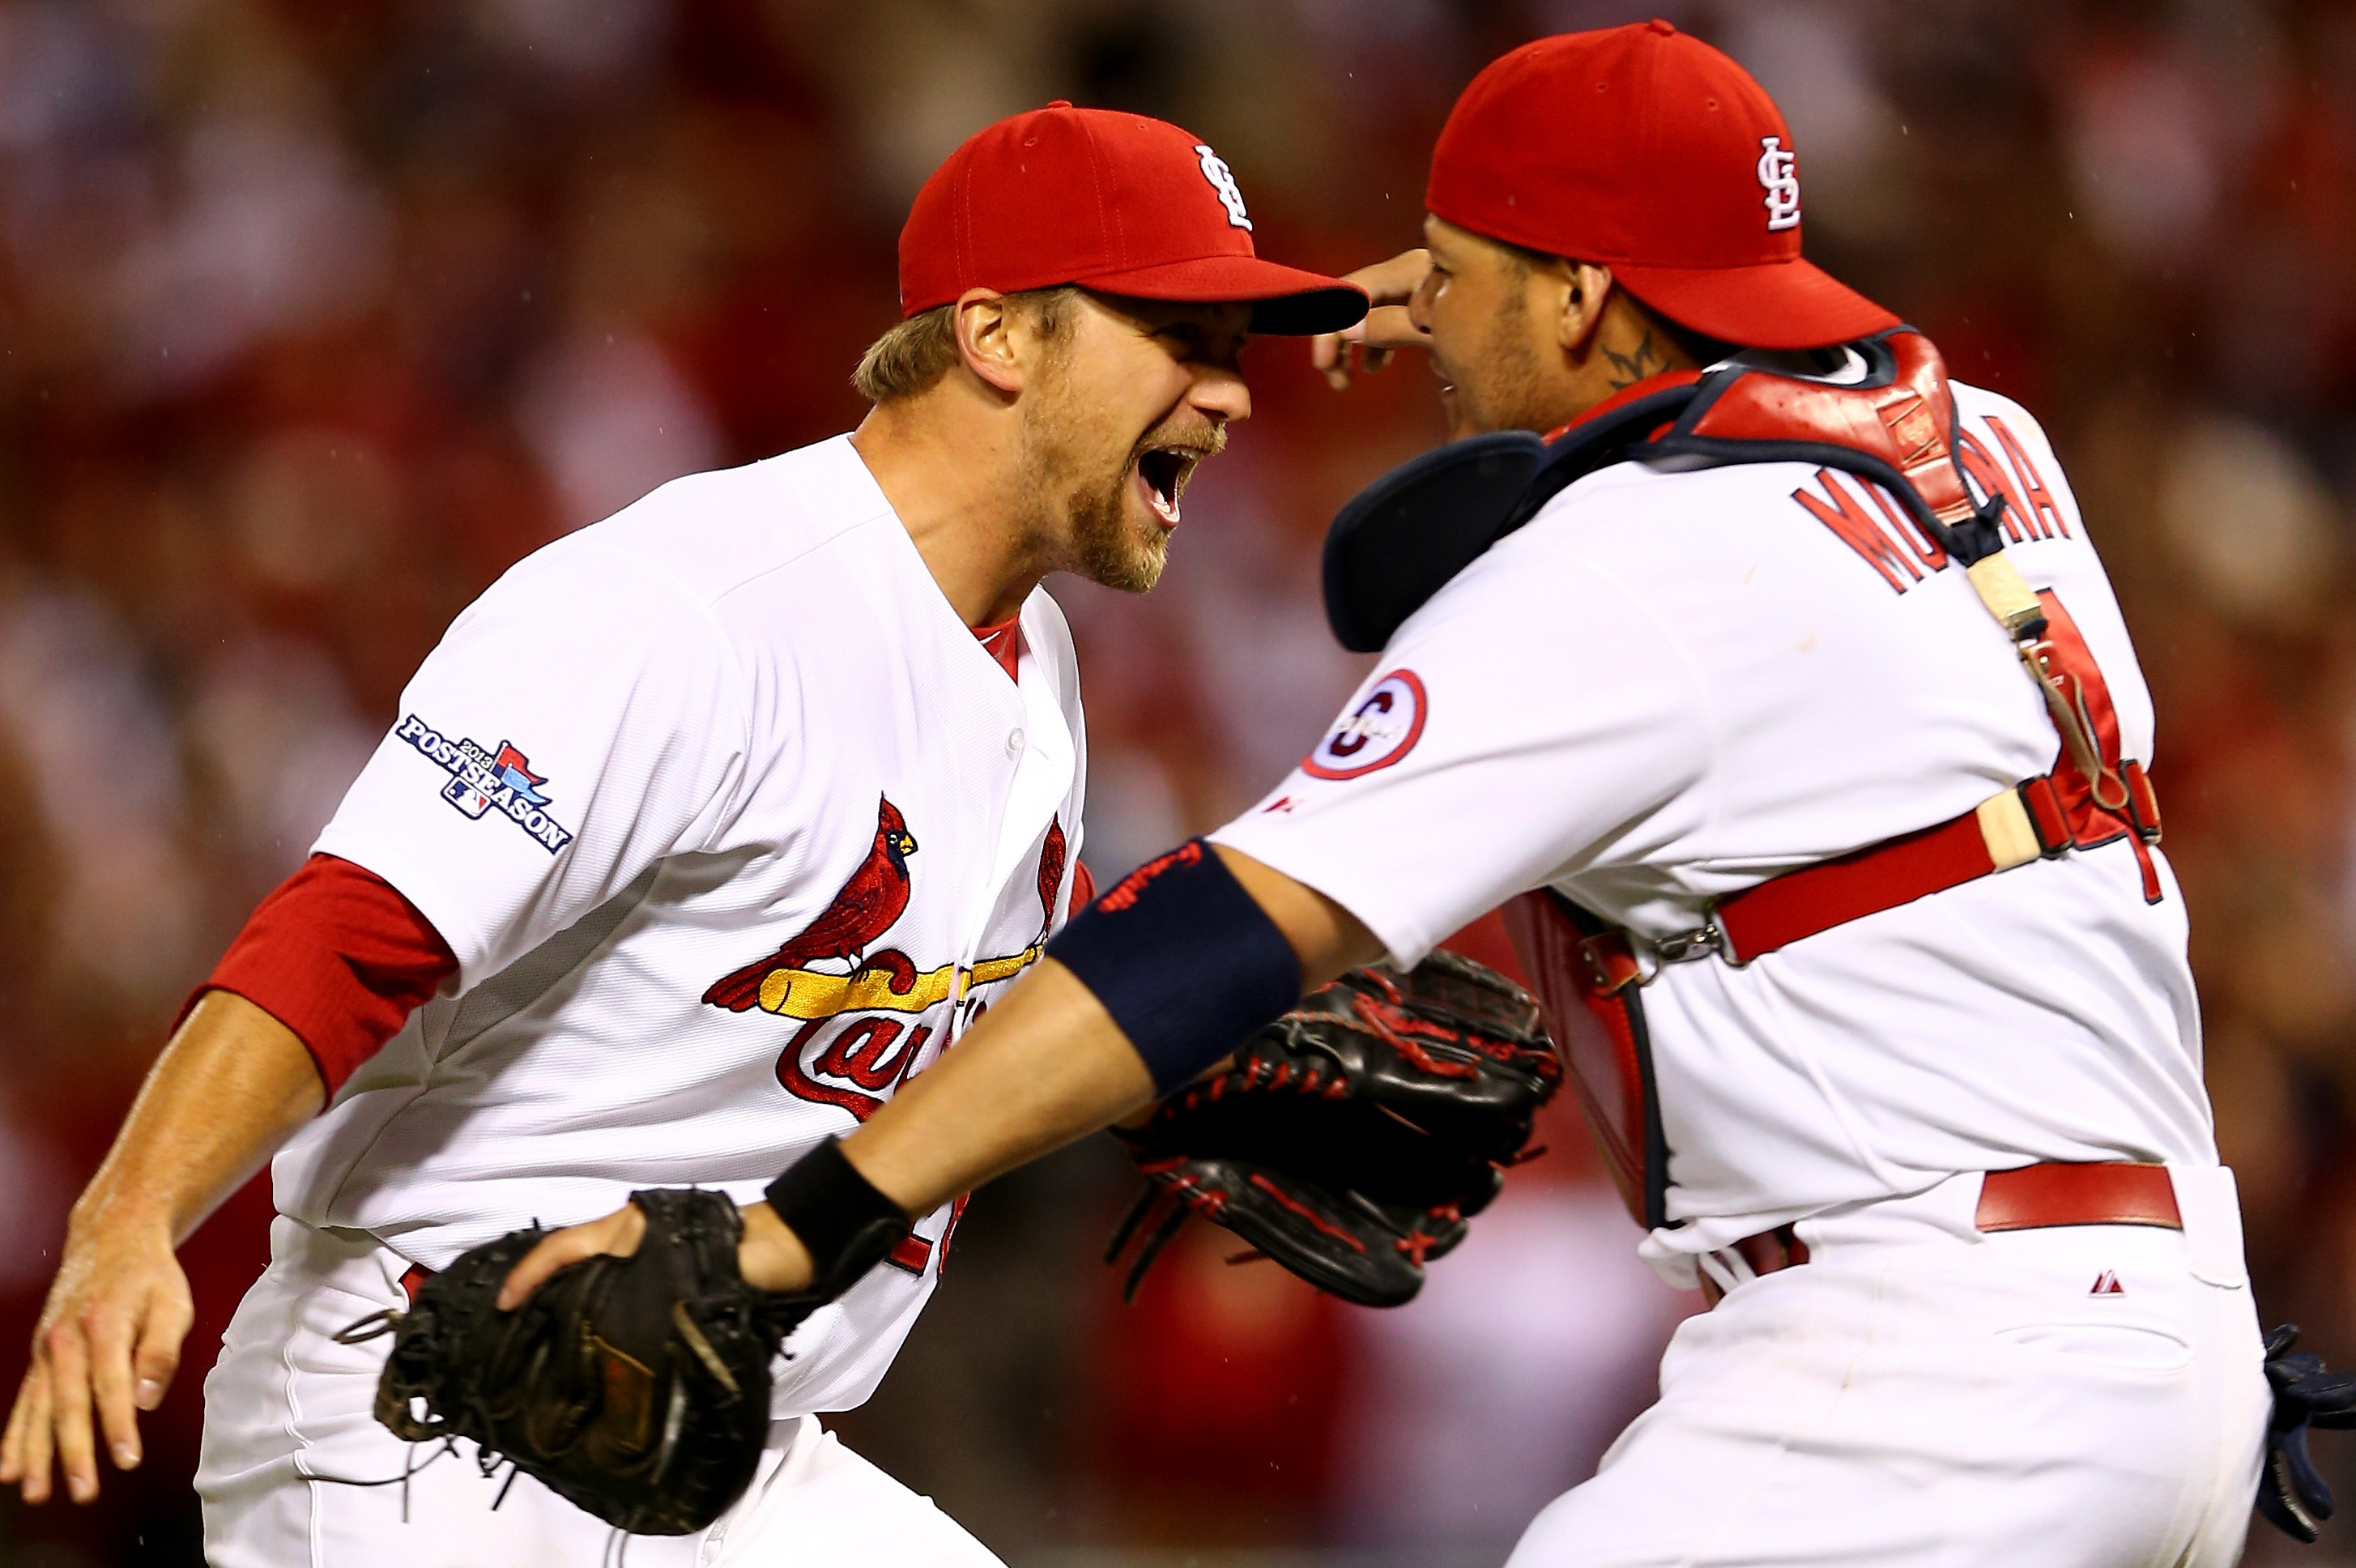 Baseball Bros on X: Yadier Molina's pink catchers gear for